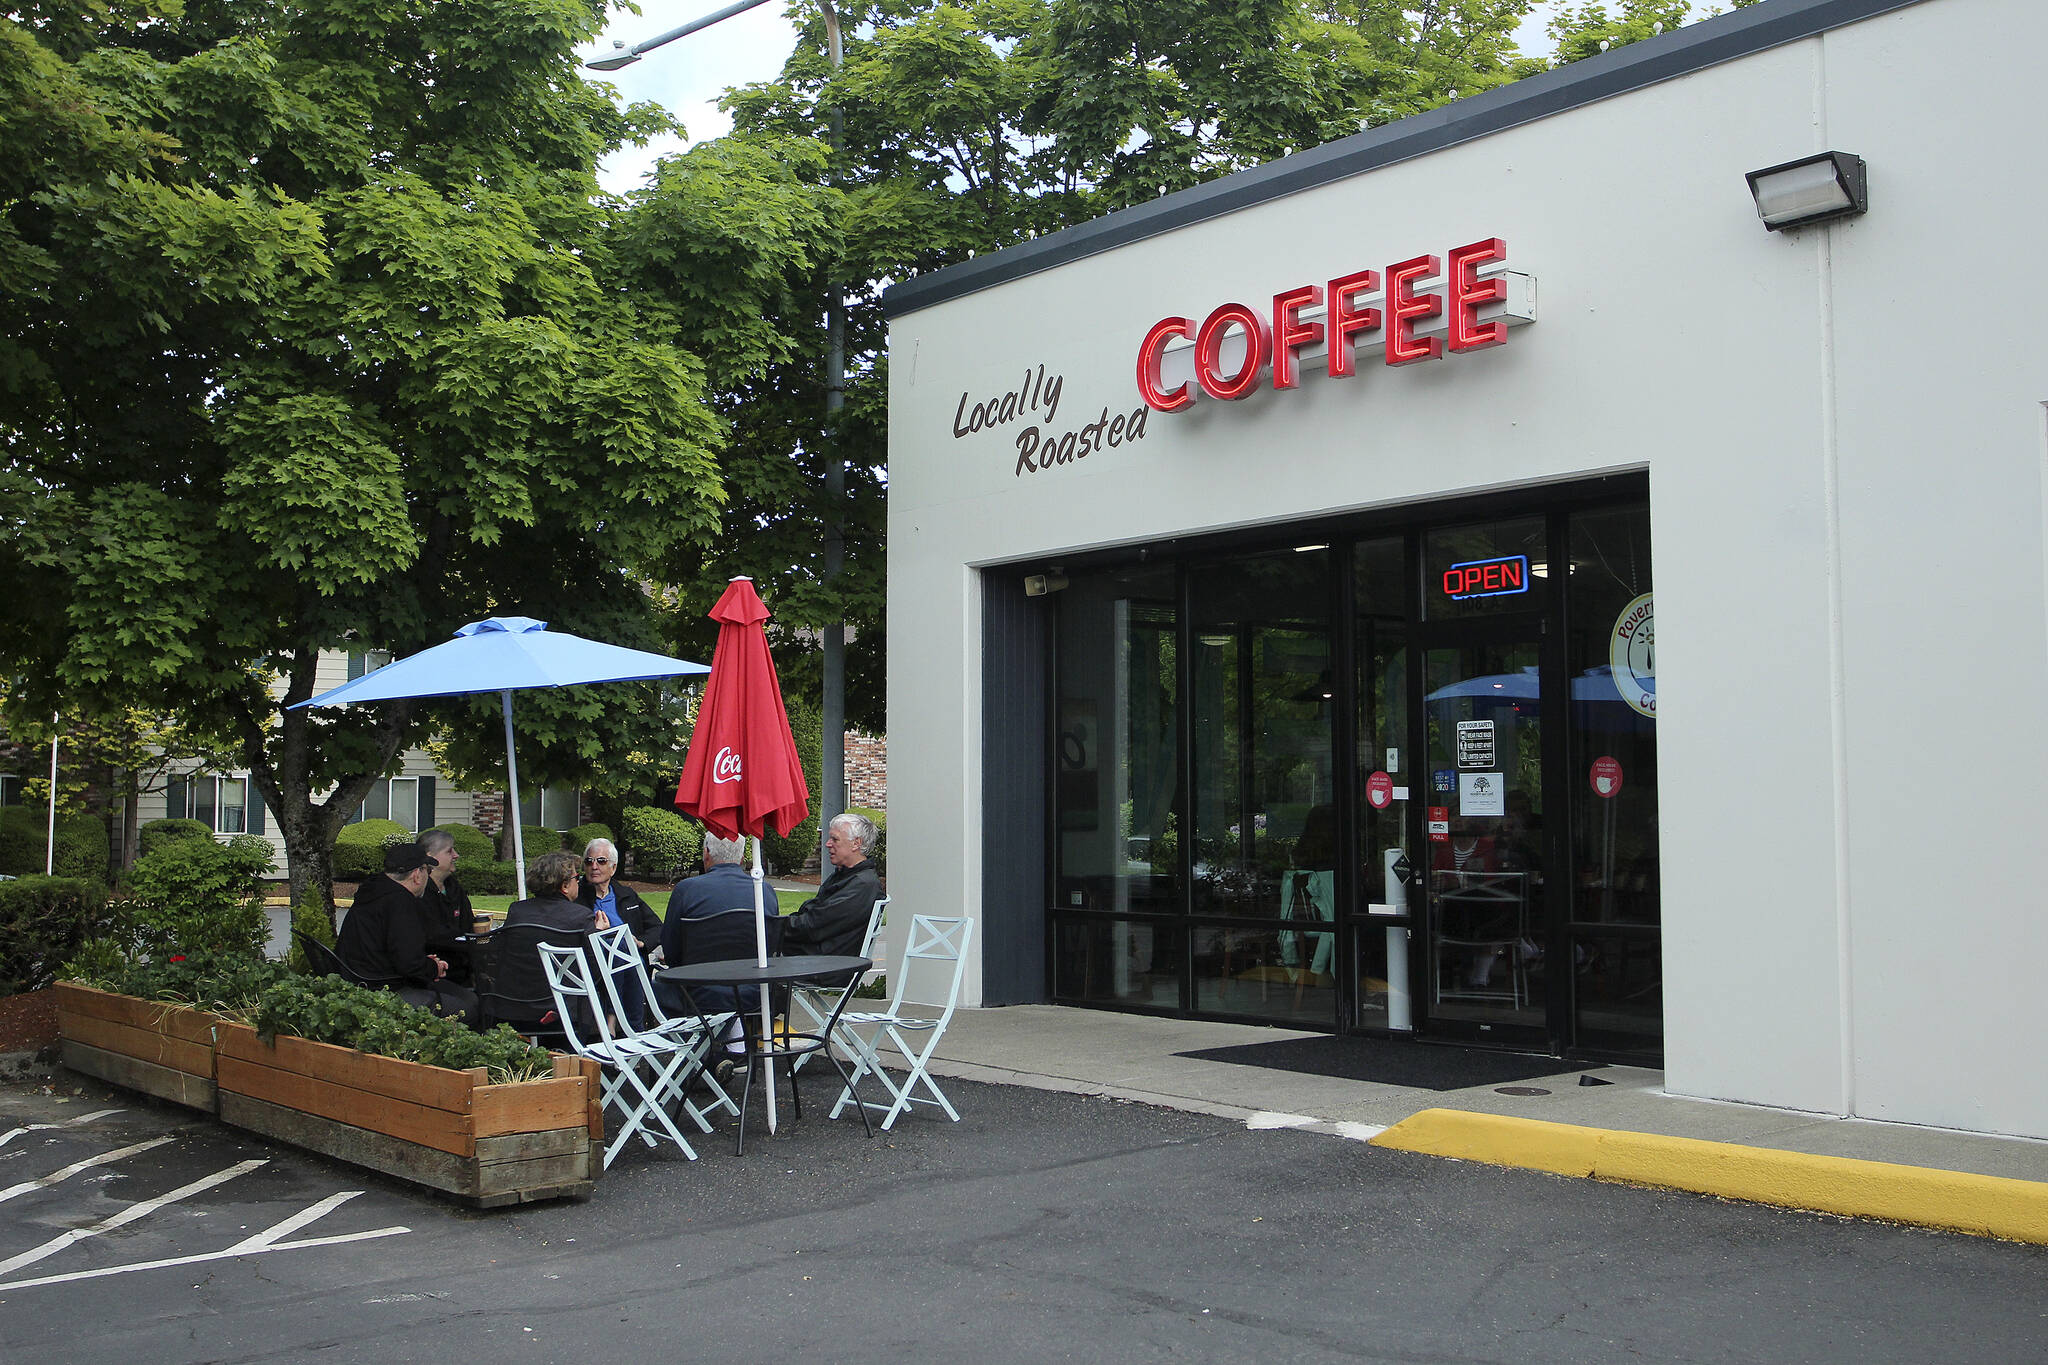 Poverty Bay Cafe is located at 1108 S. 322nd Place in Federal Way. Olivia Sullivan/the Mirror